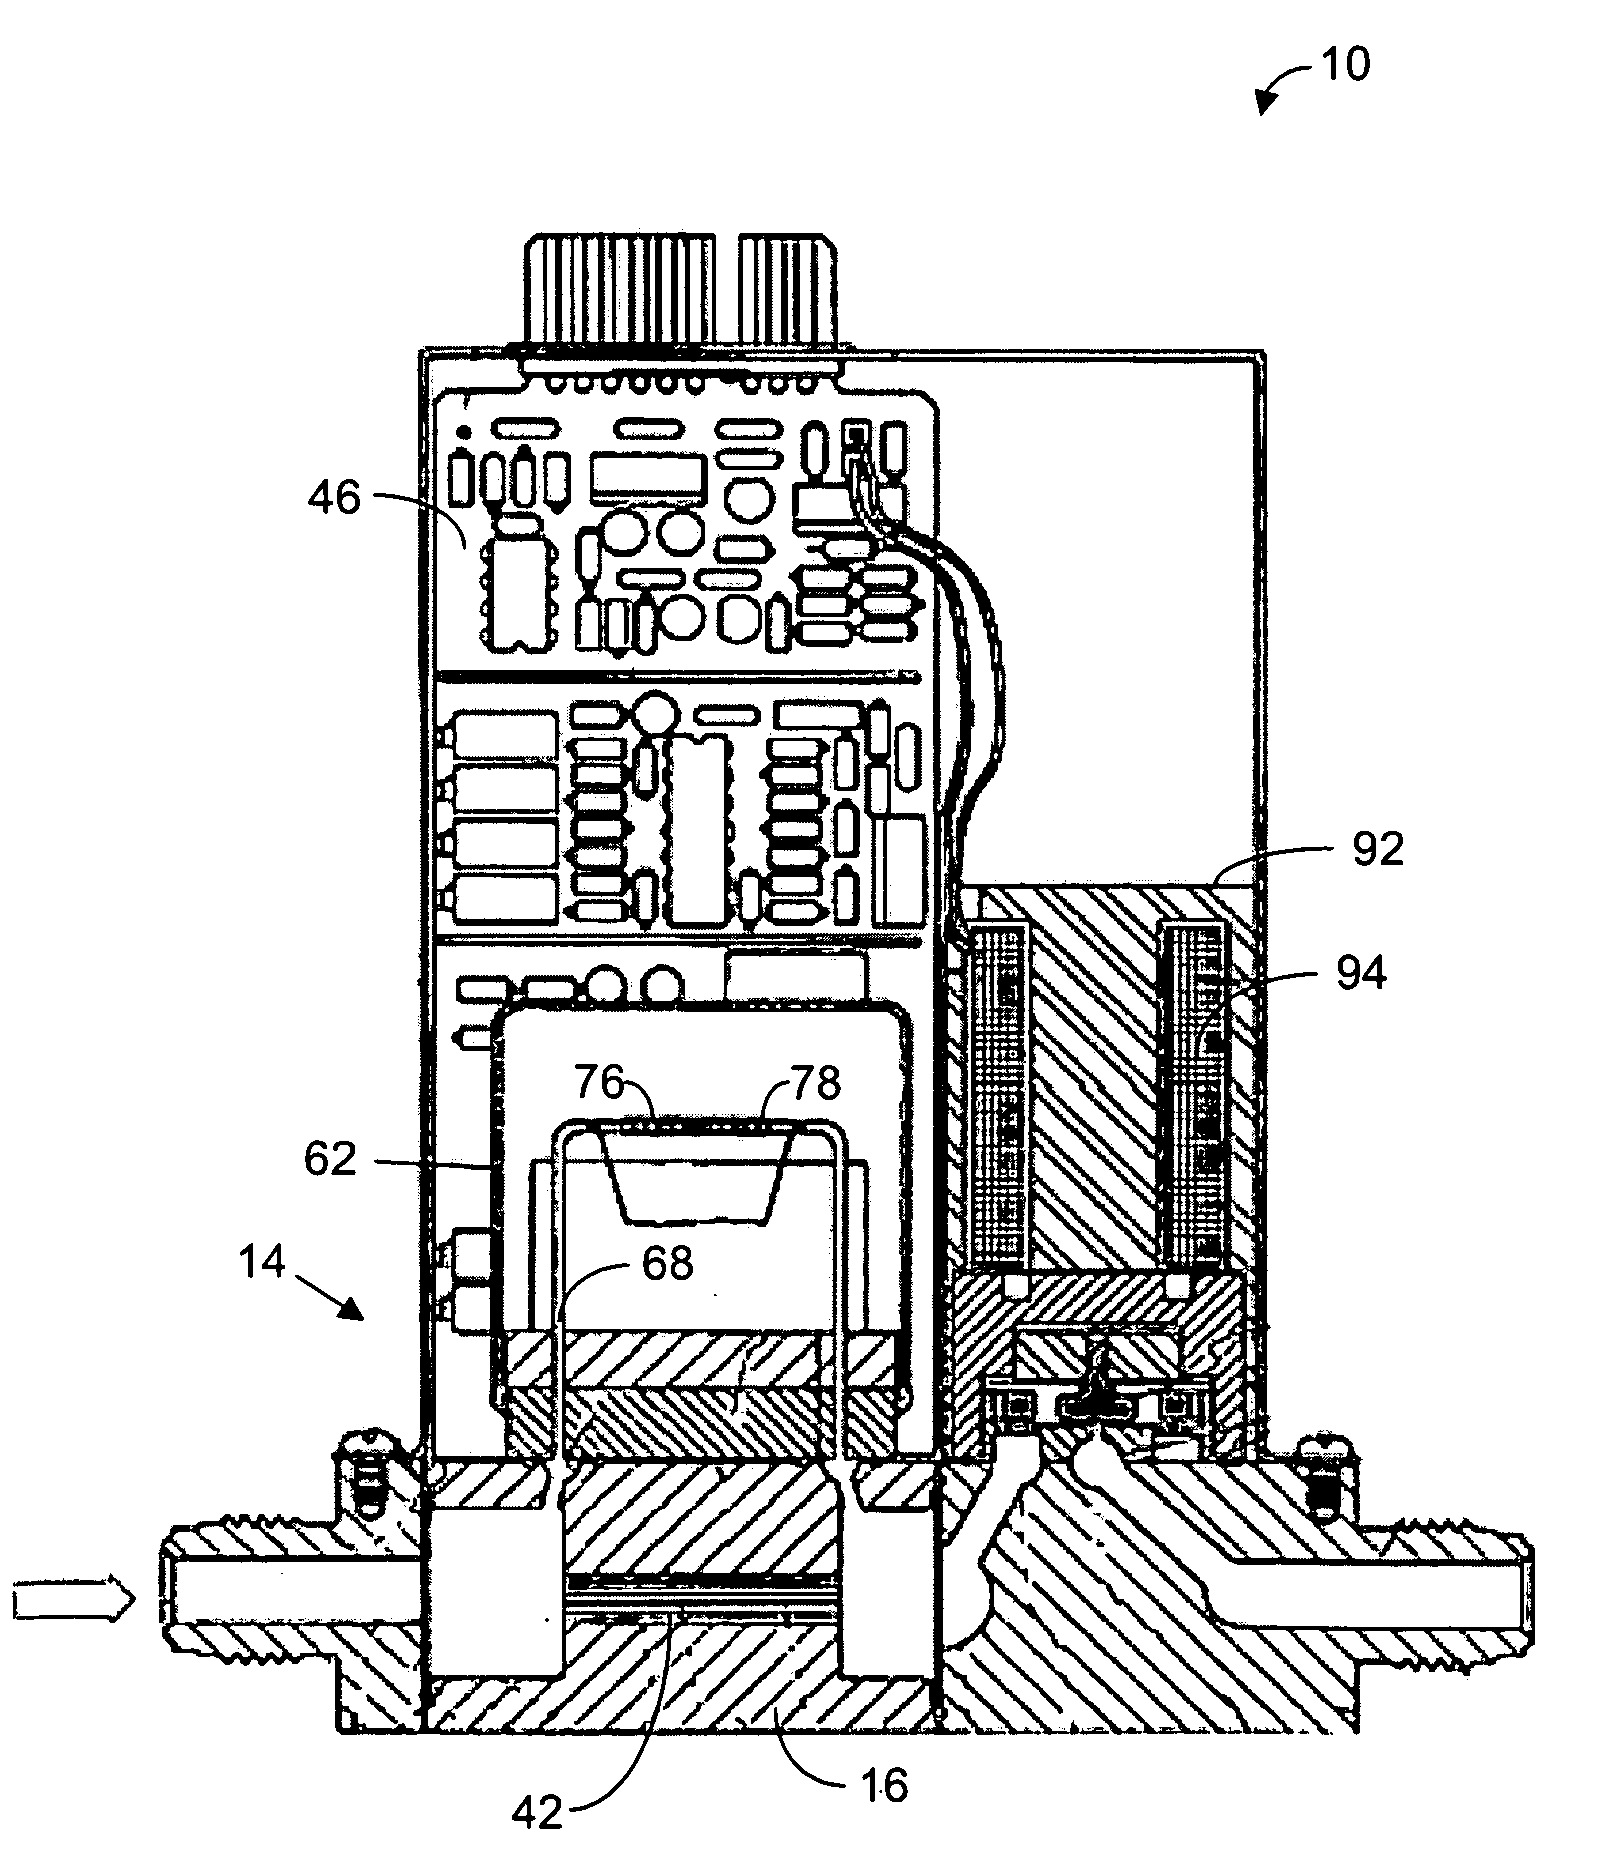 System for and method of providing a wide-range flow controller